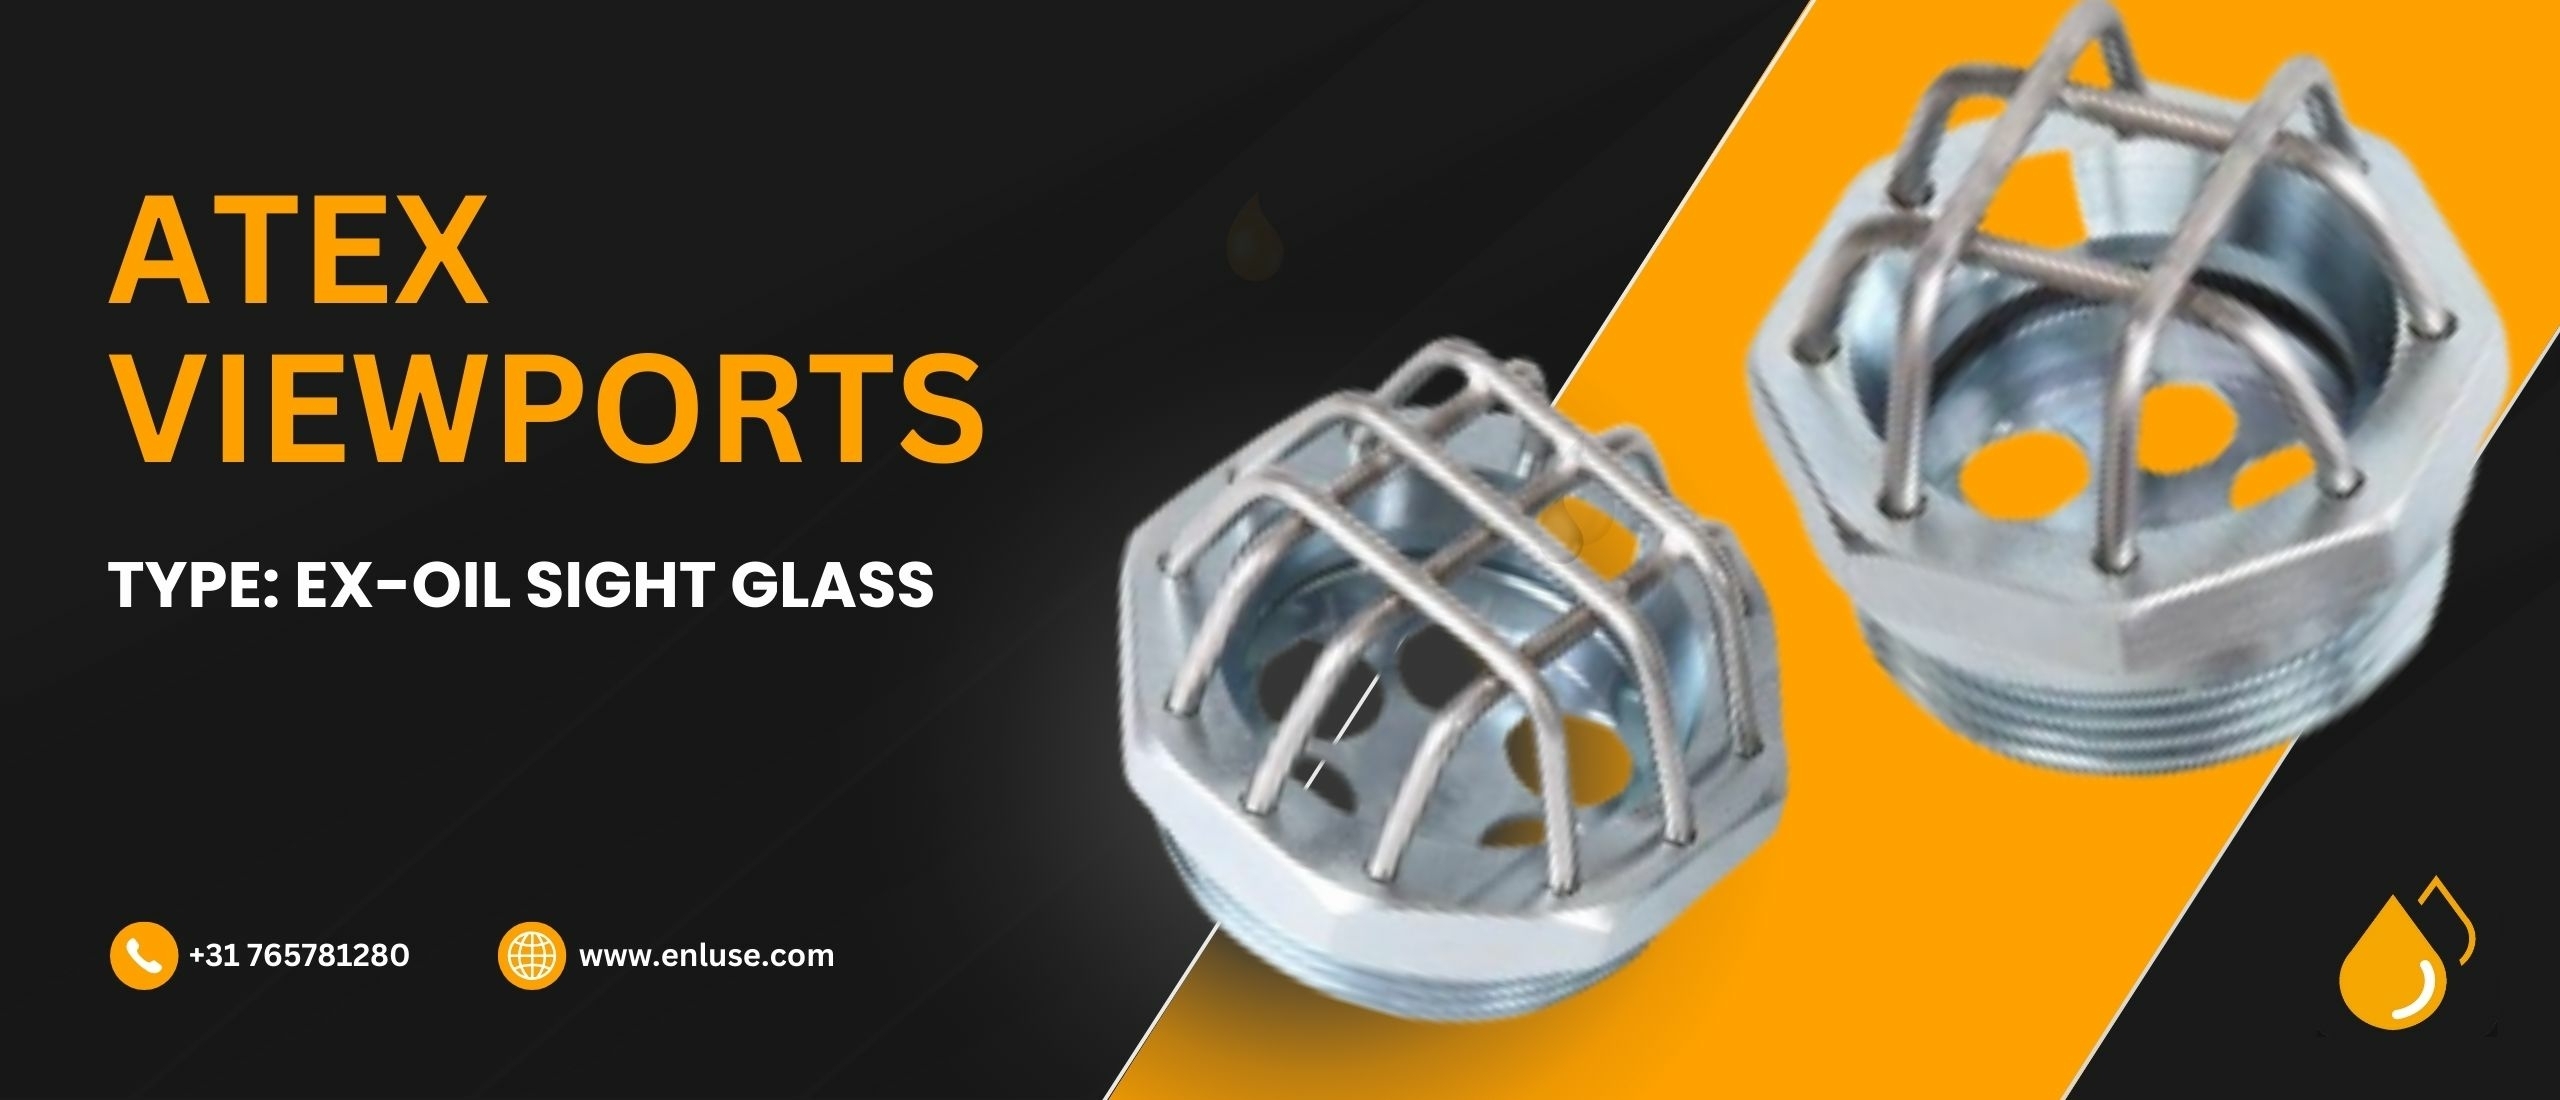 Safety Through Clarity: Unveiling ATEX Ex-Oil Sight Glass Viewports